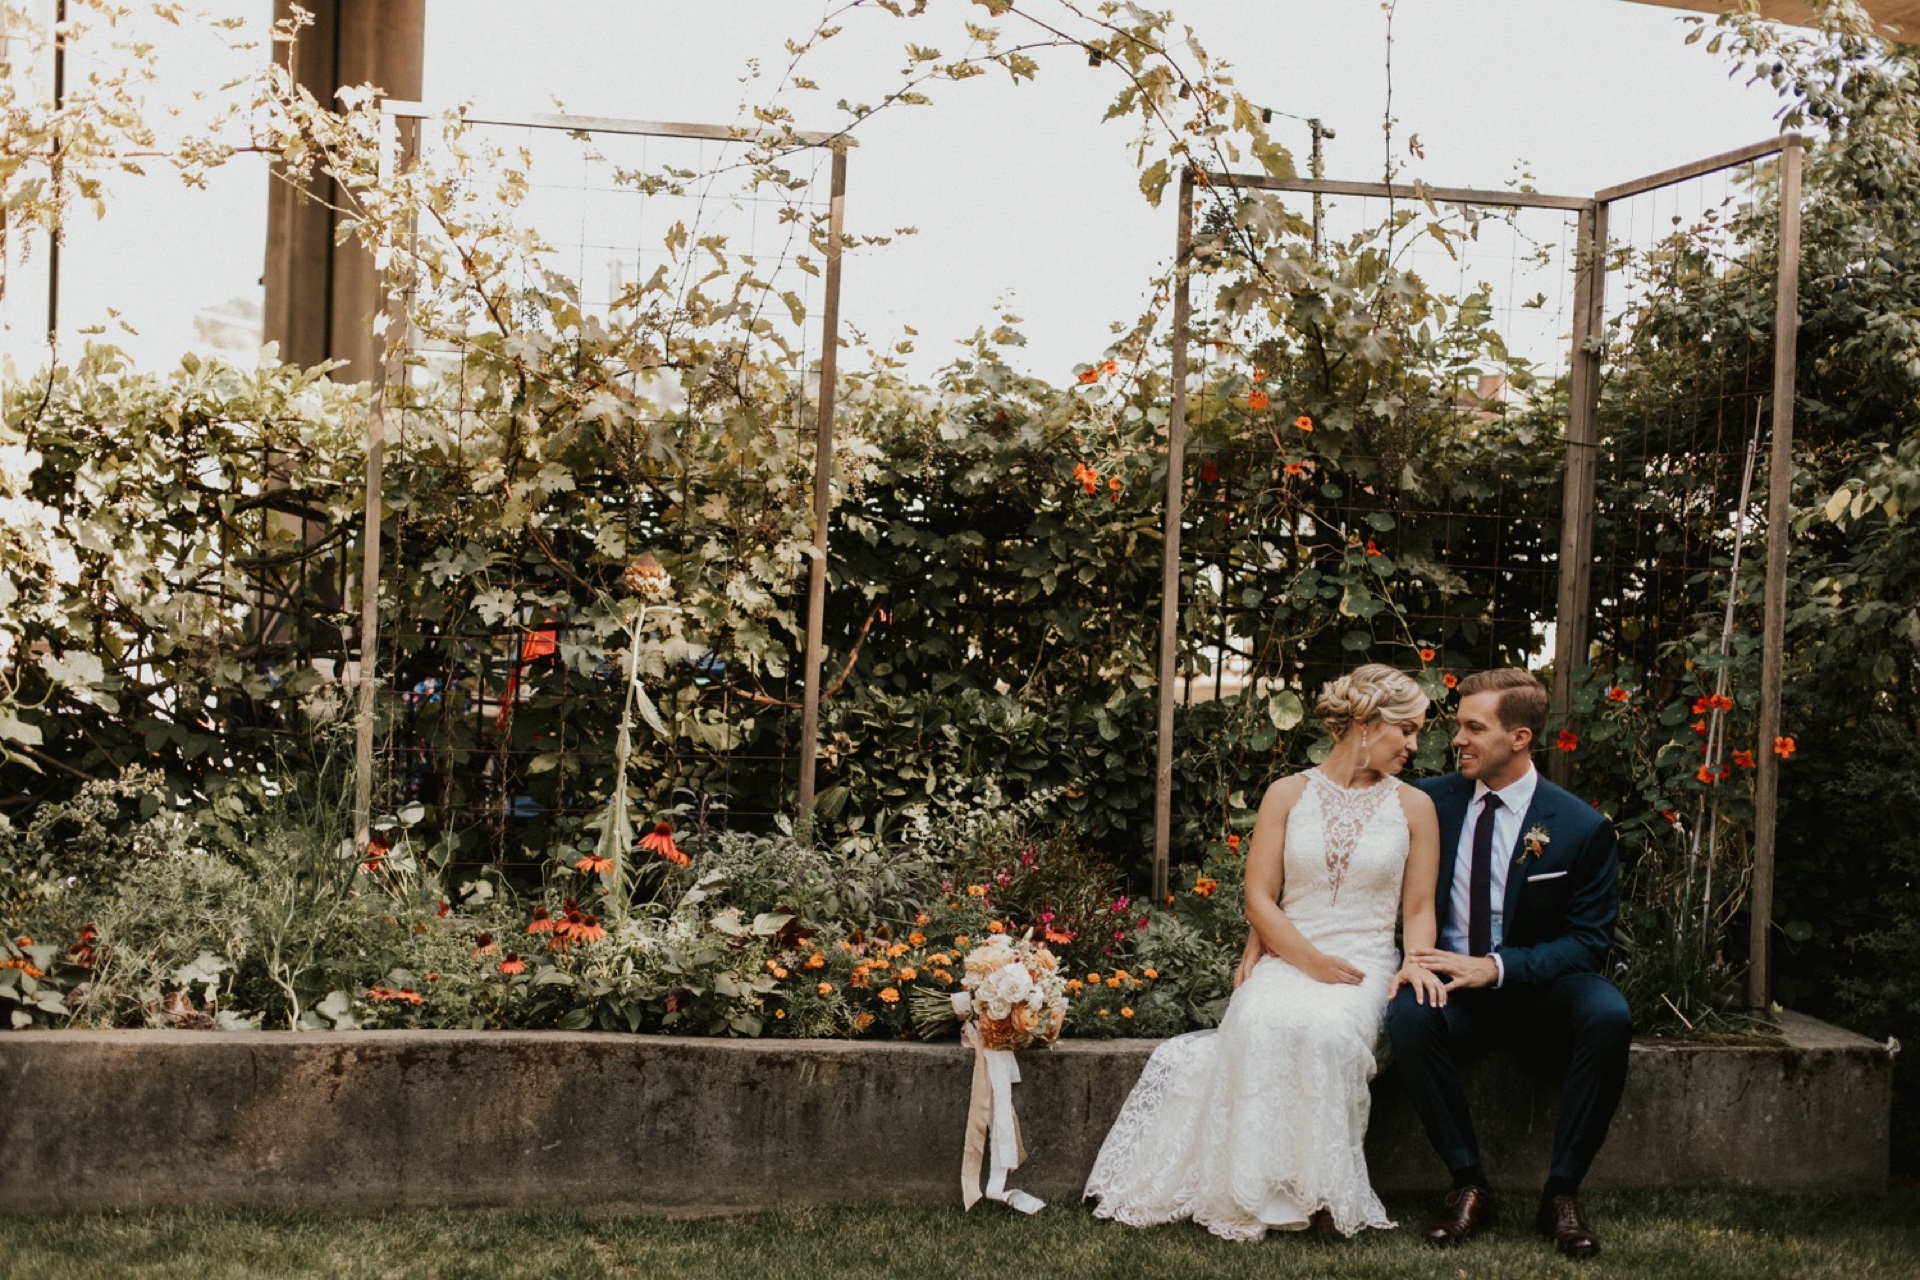 Corson Building Wedding by Sarah Anne Photography